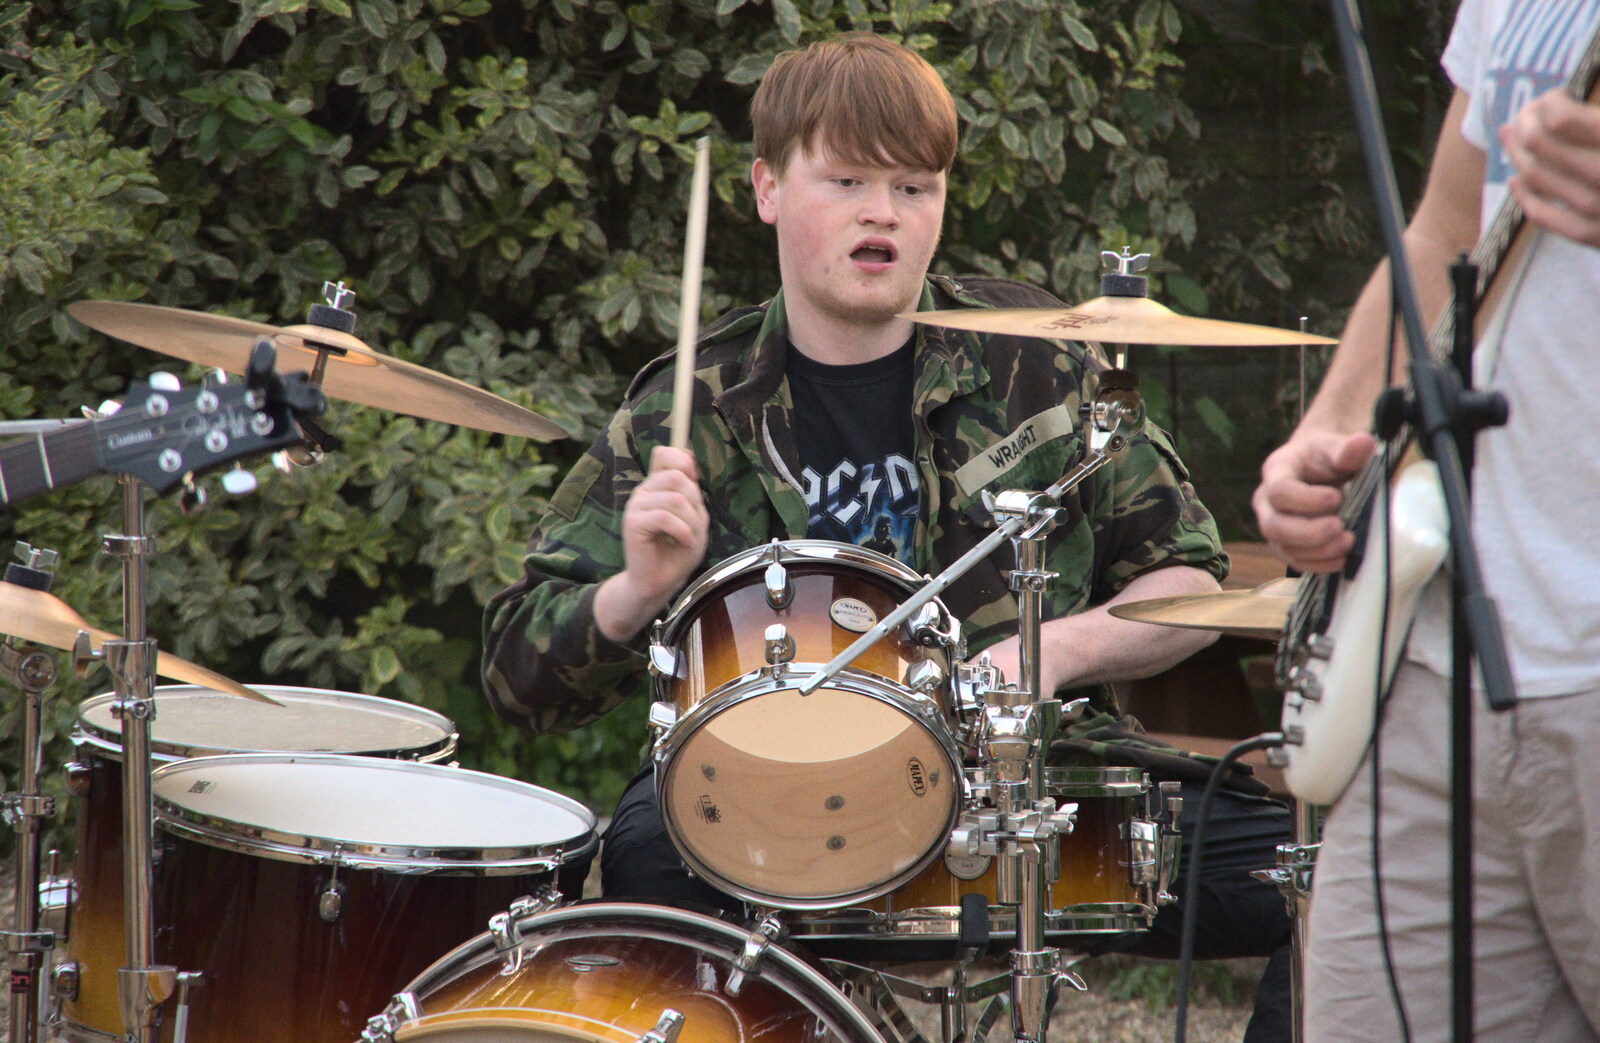 Drumming action from Ricochet at the Queen's Head, Eye, Suffolk - 26th May 2023